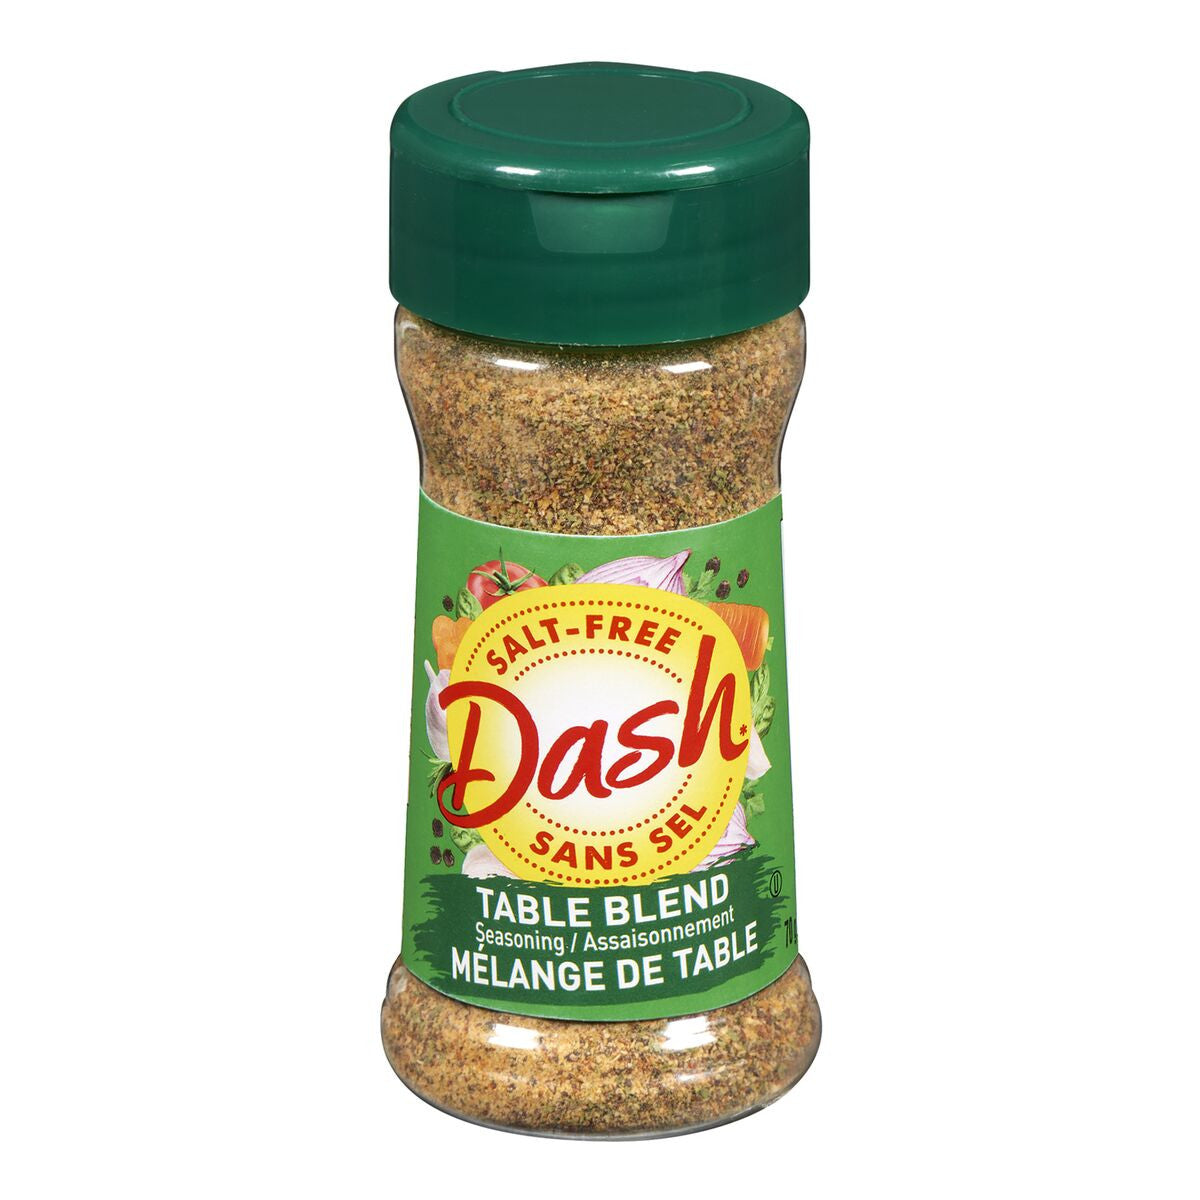 Dash Salt-Free Table Blend Seasoning, 70g/2.4 oz., Bottle {Imported from Canada}